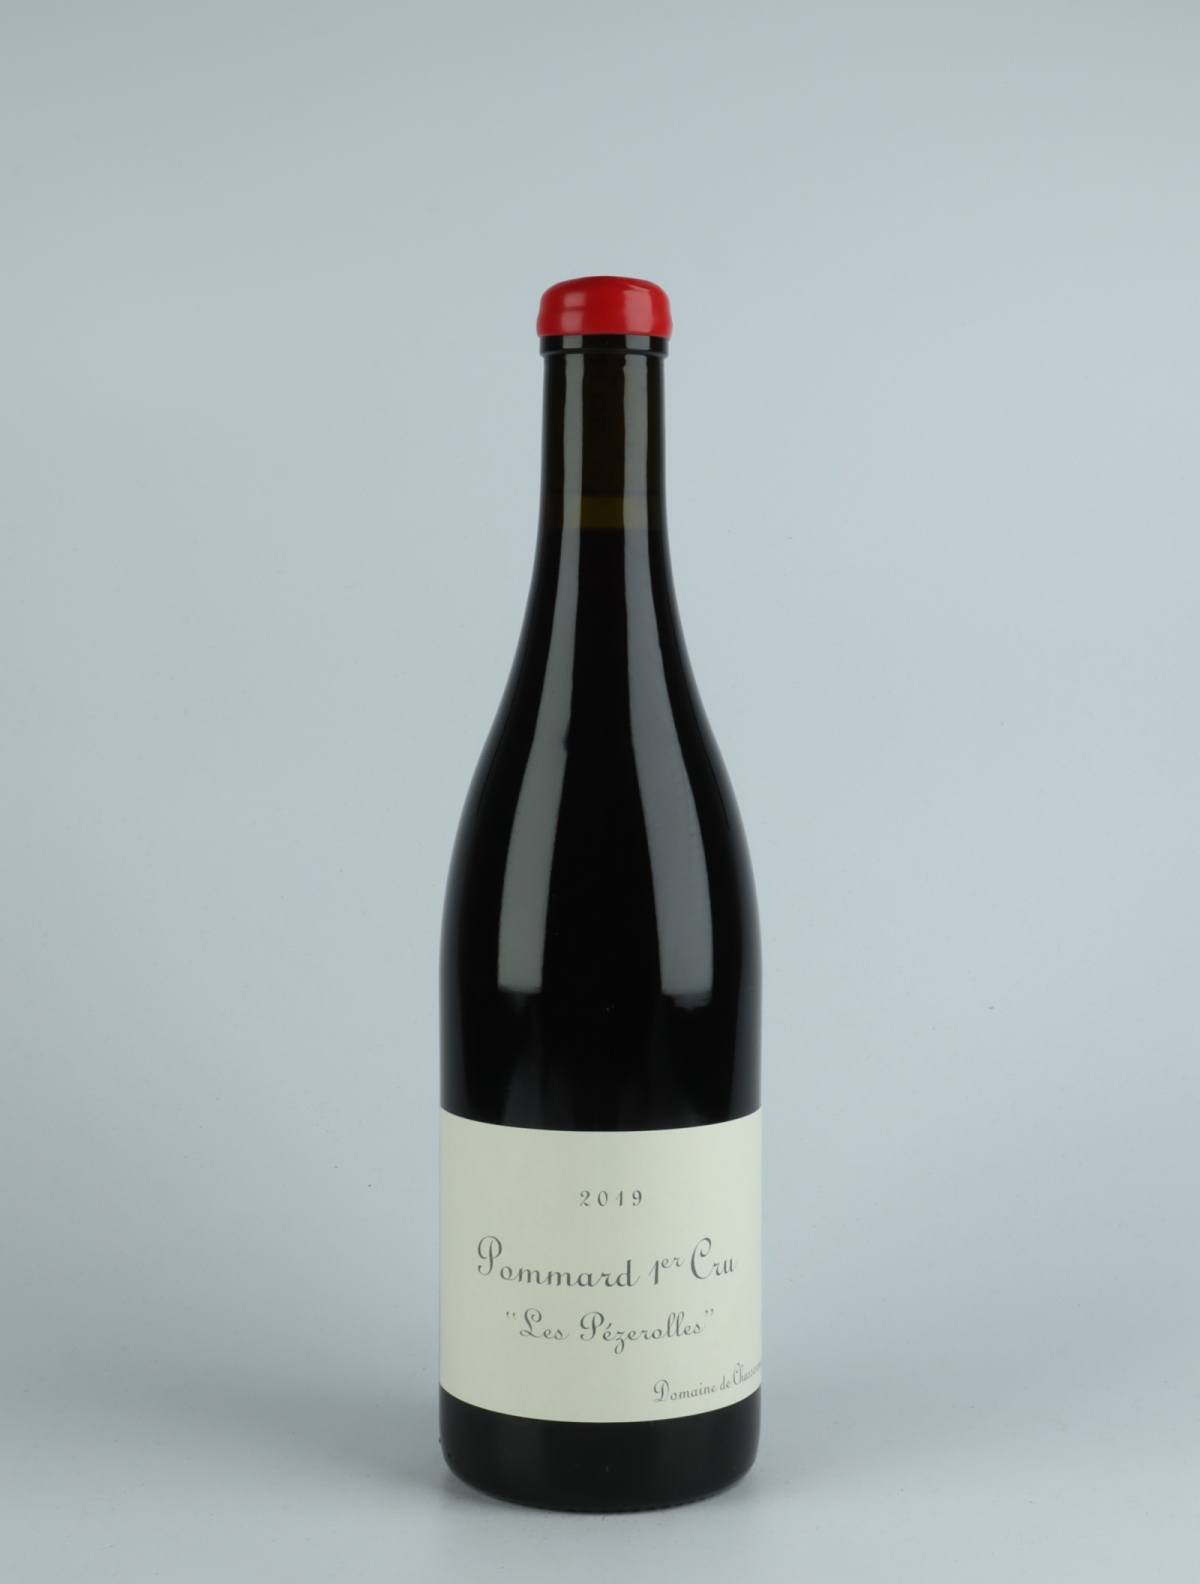 A bottle 2019 Pommard 1. Cru Les Pezzerolles Red wine from Domaine de Chassorney, Burgundy in France